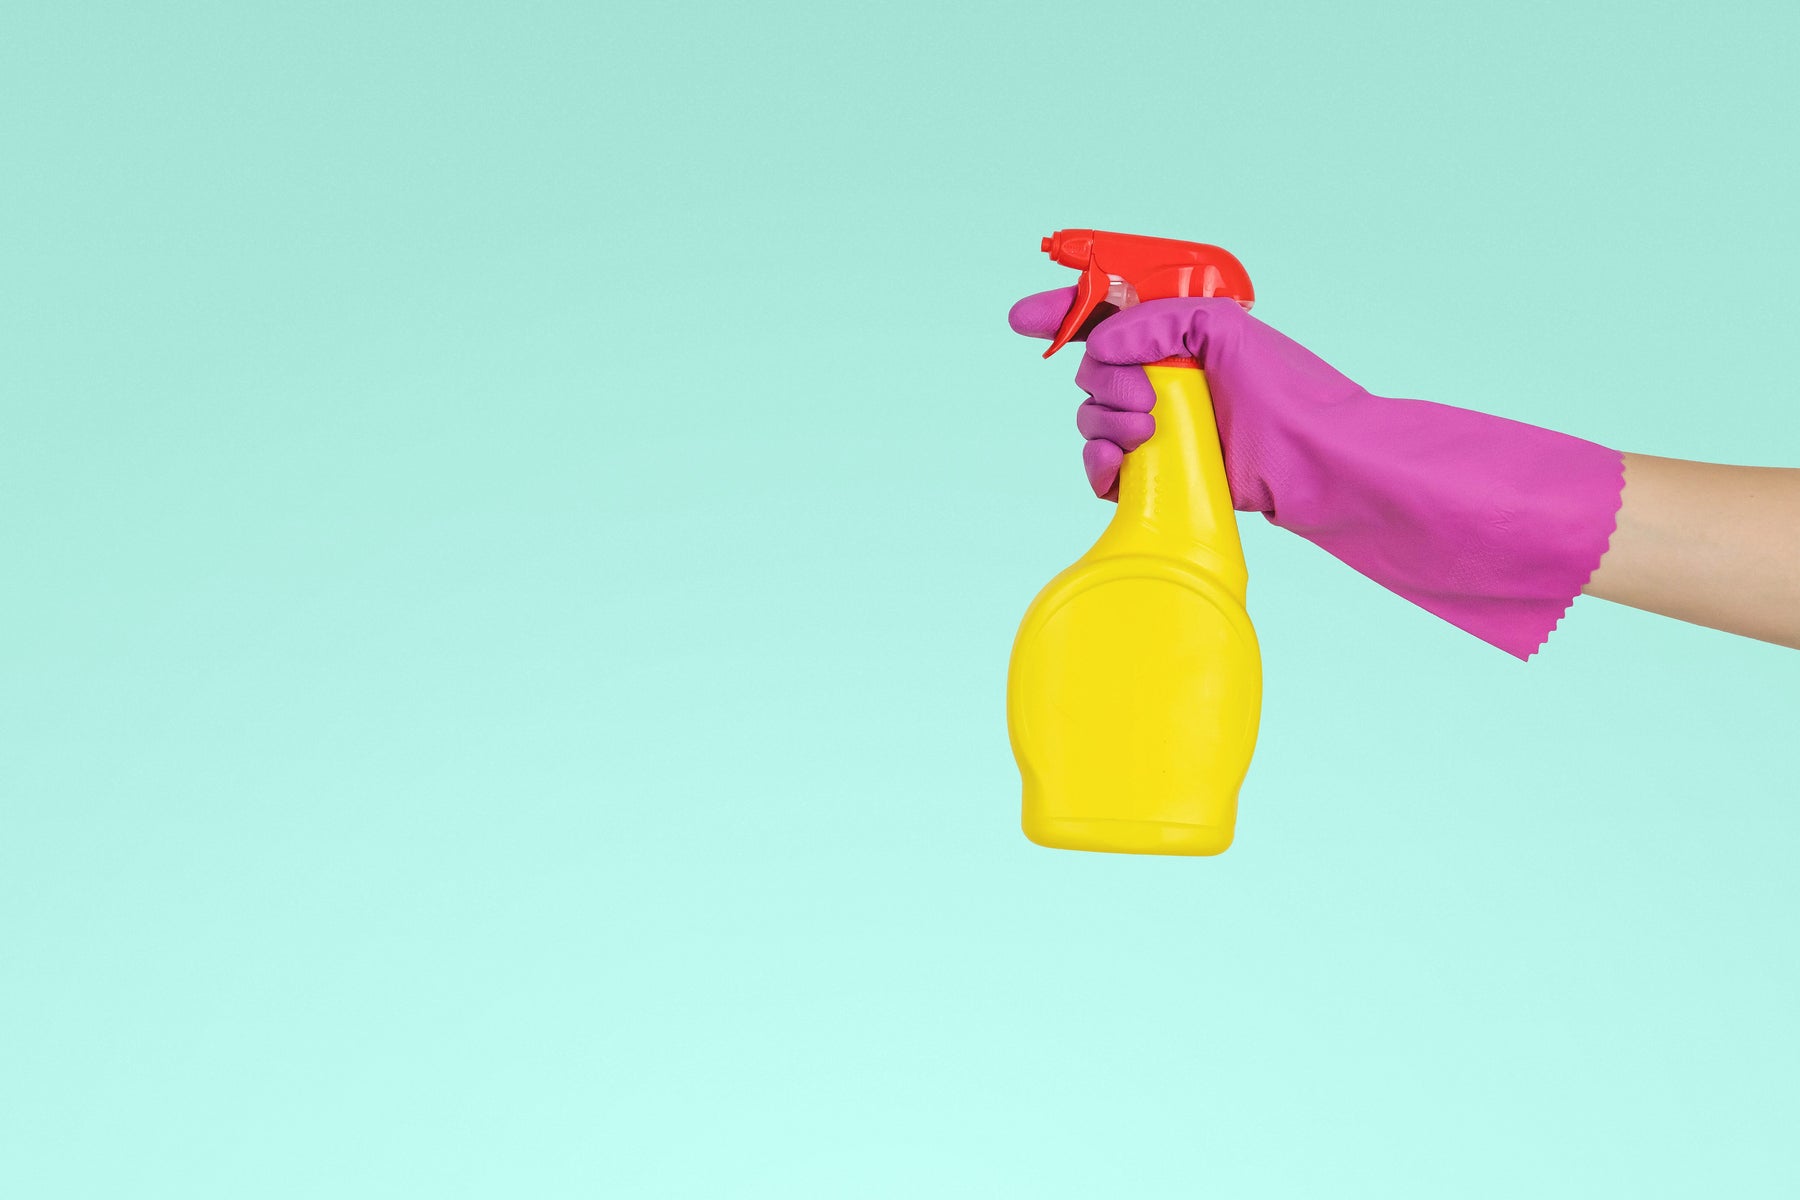 Shop Safely - Enhanced Cleaning Procedures